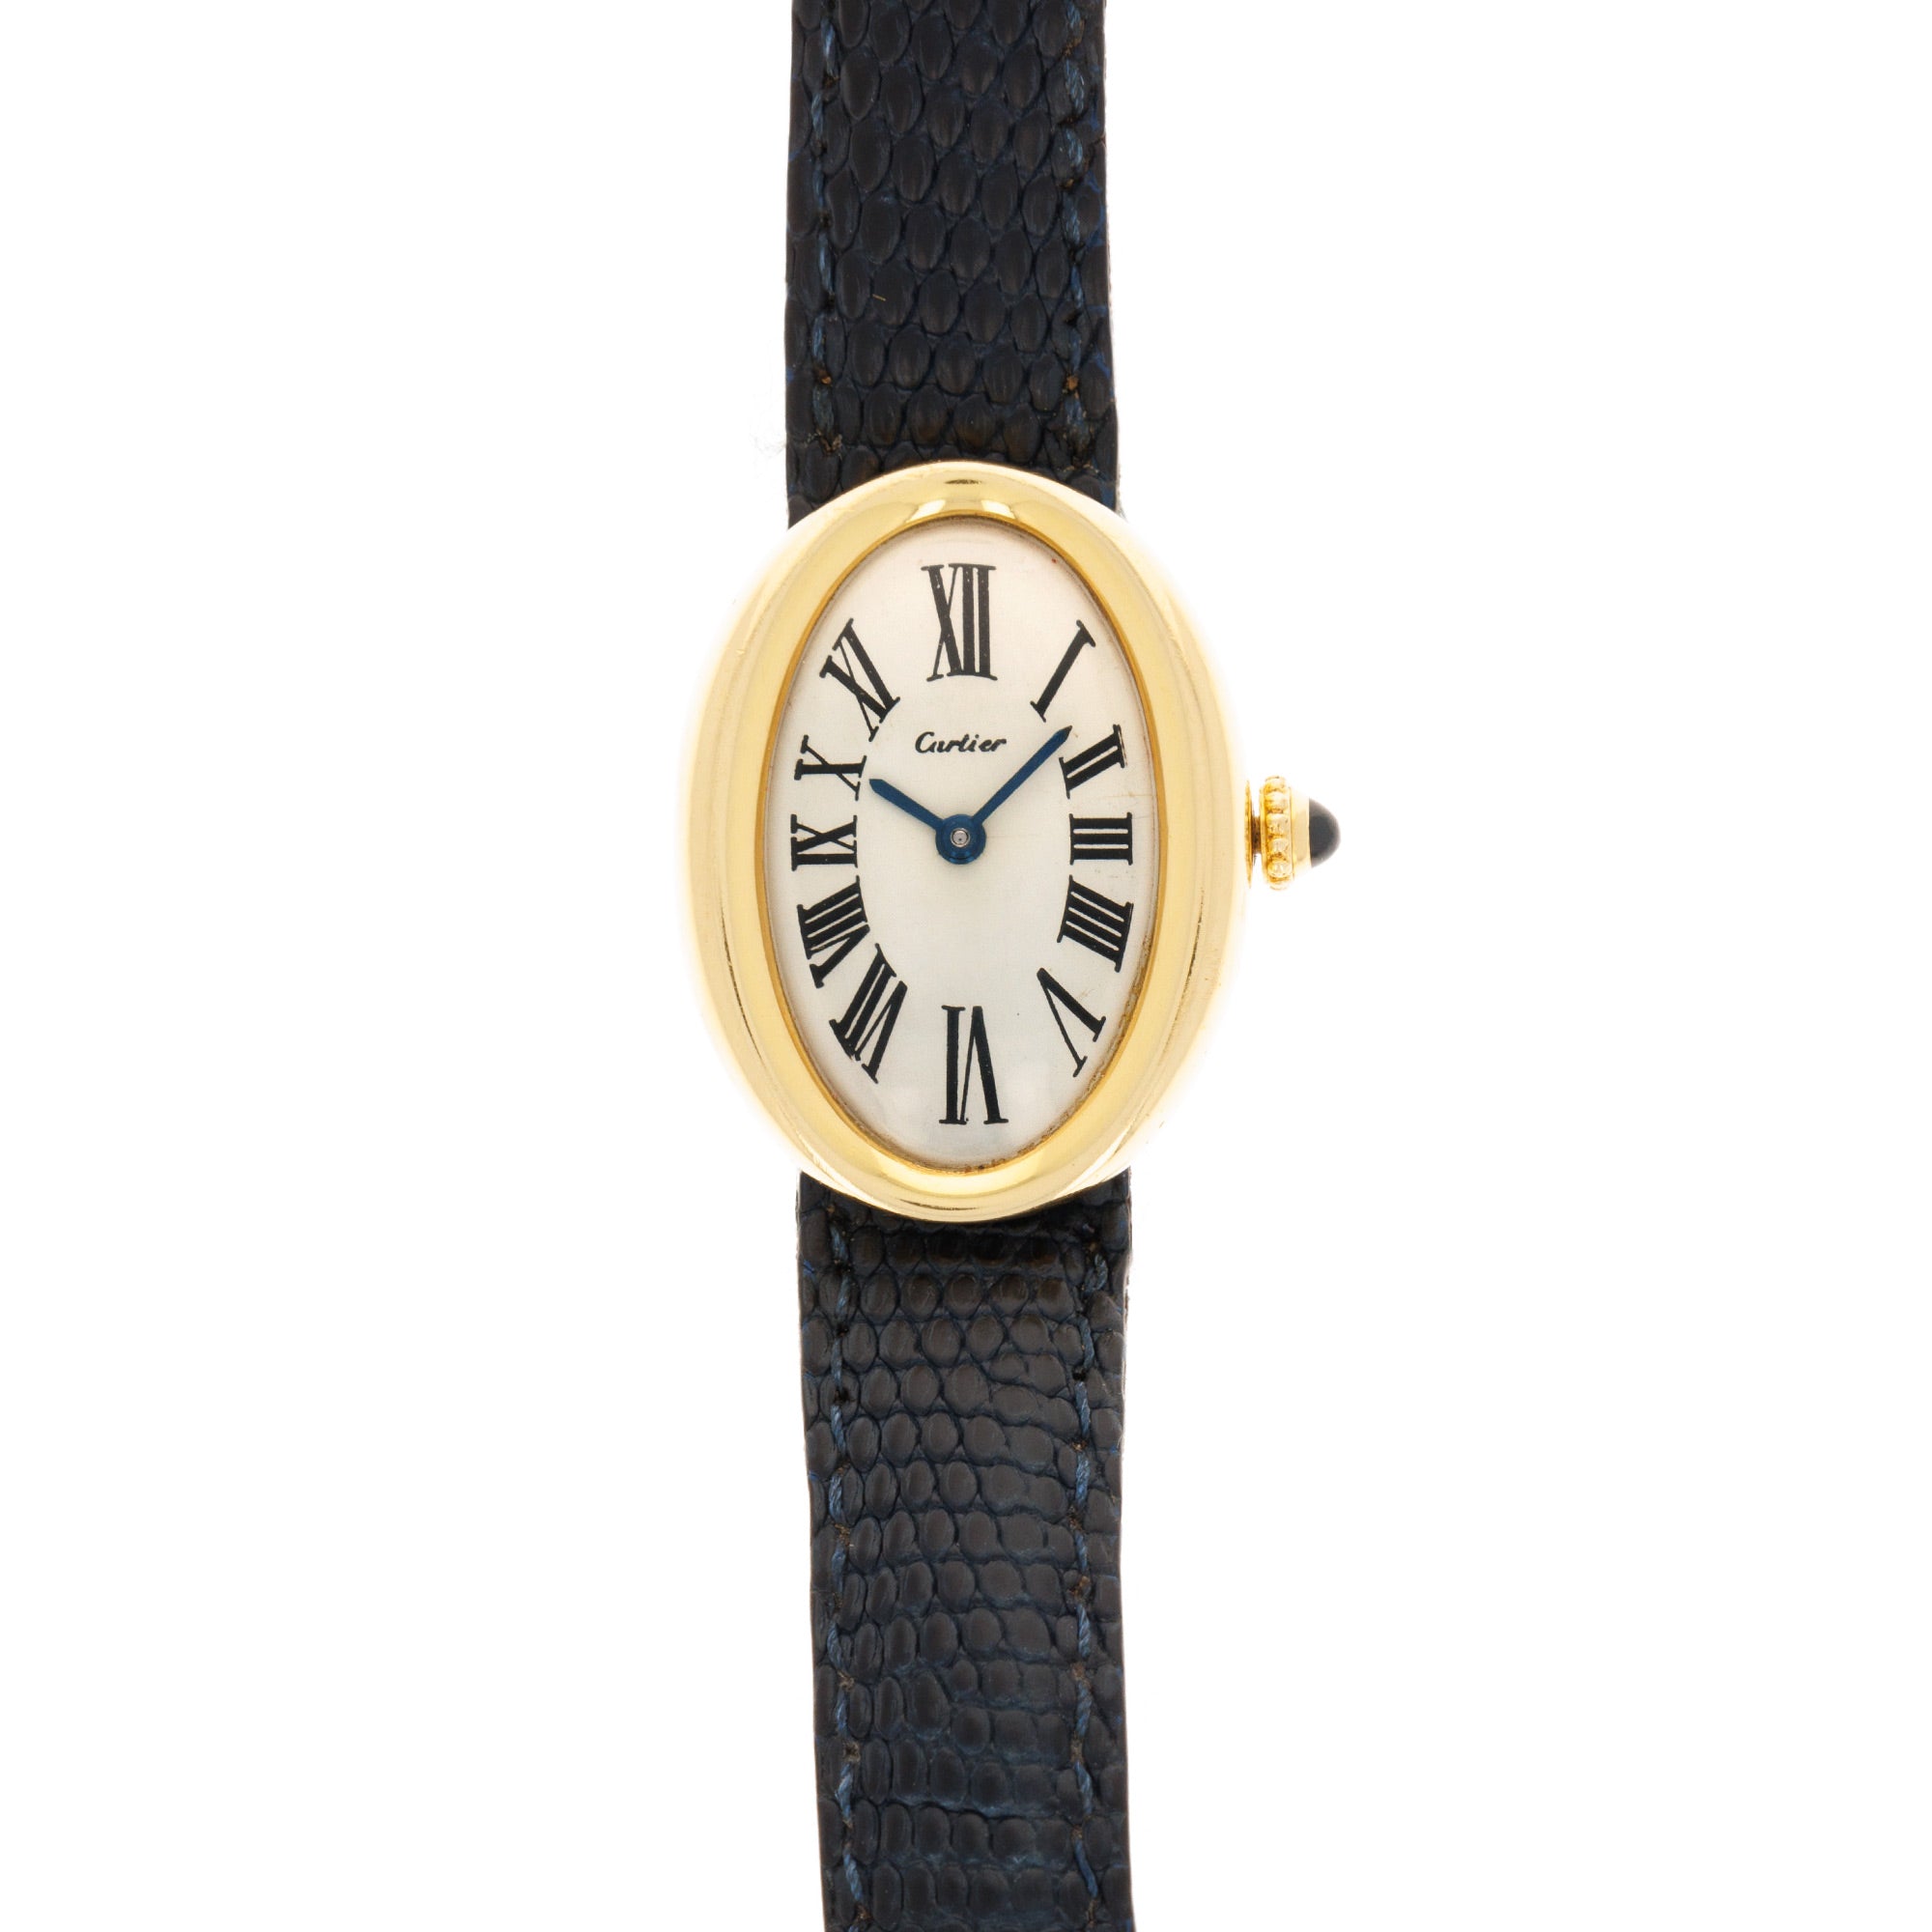 Cartier - Cartier Yellow Gold Baignoire London - The Keystone Watches